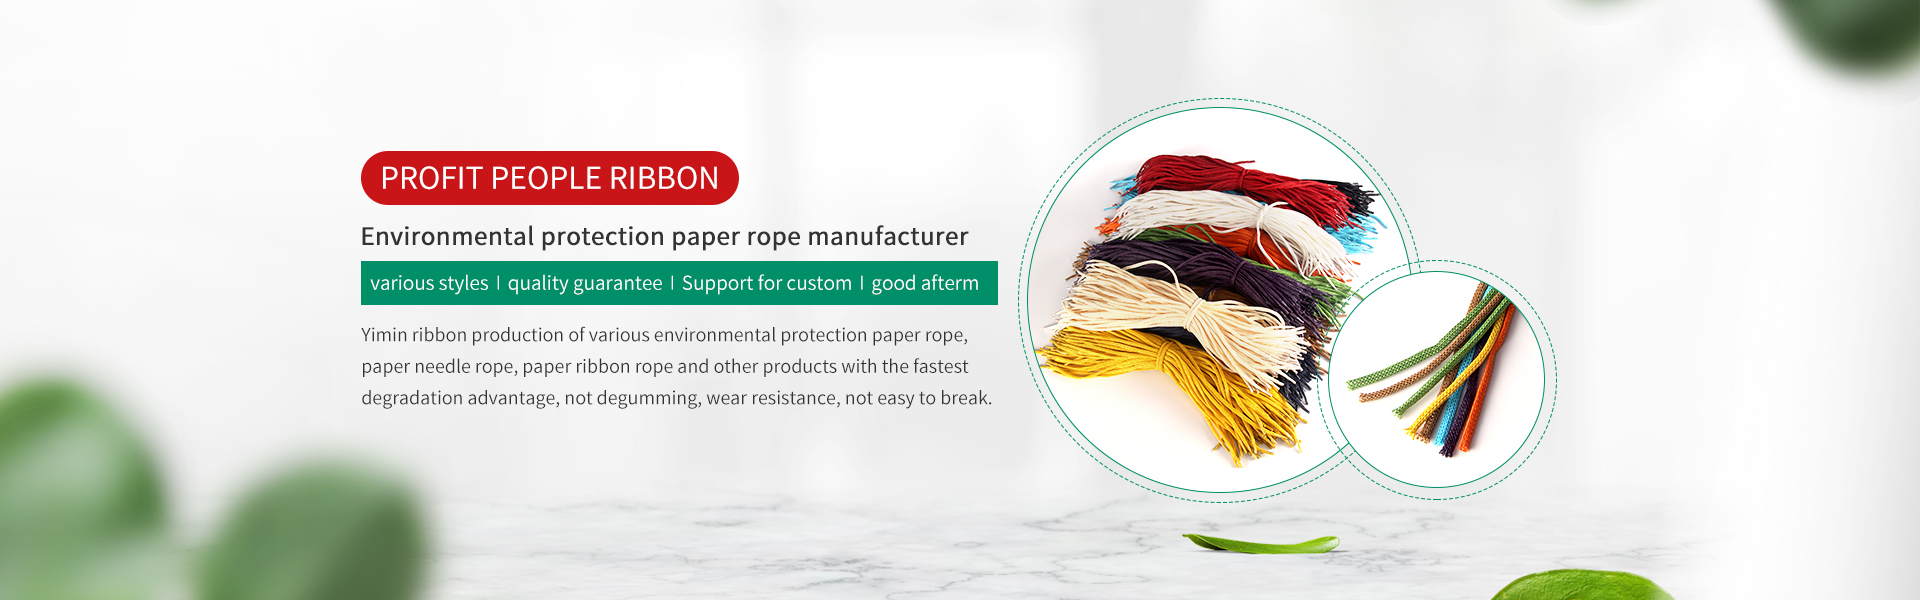 Environmental protection paper rope